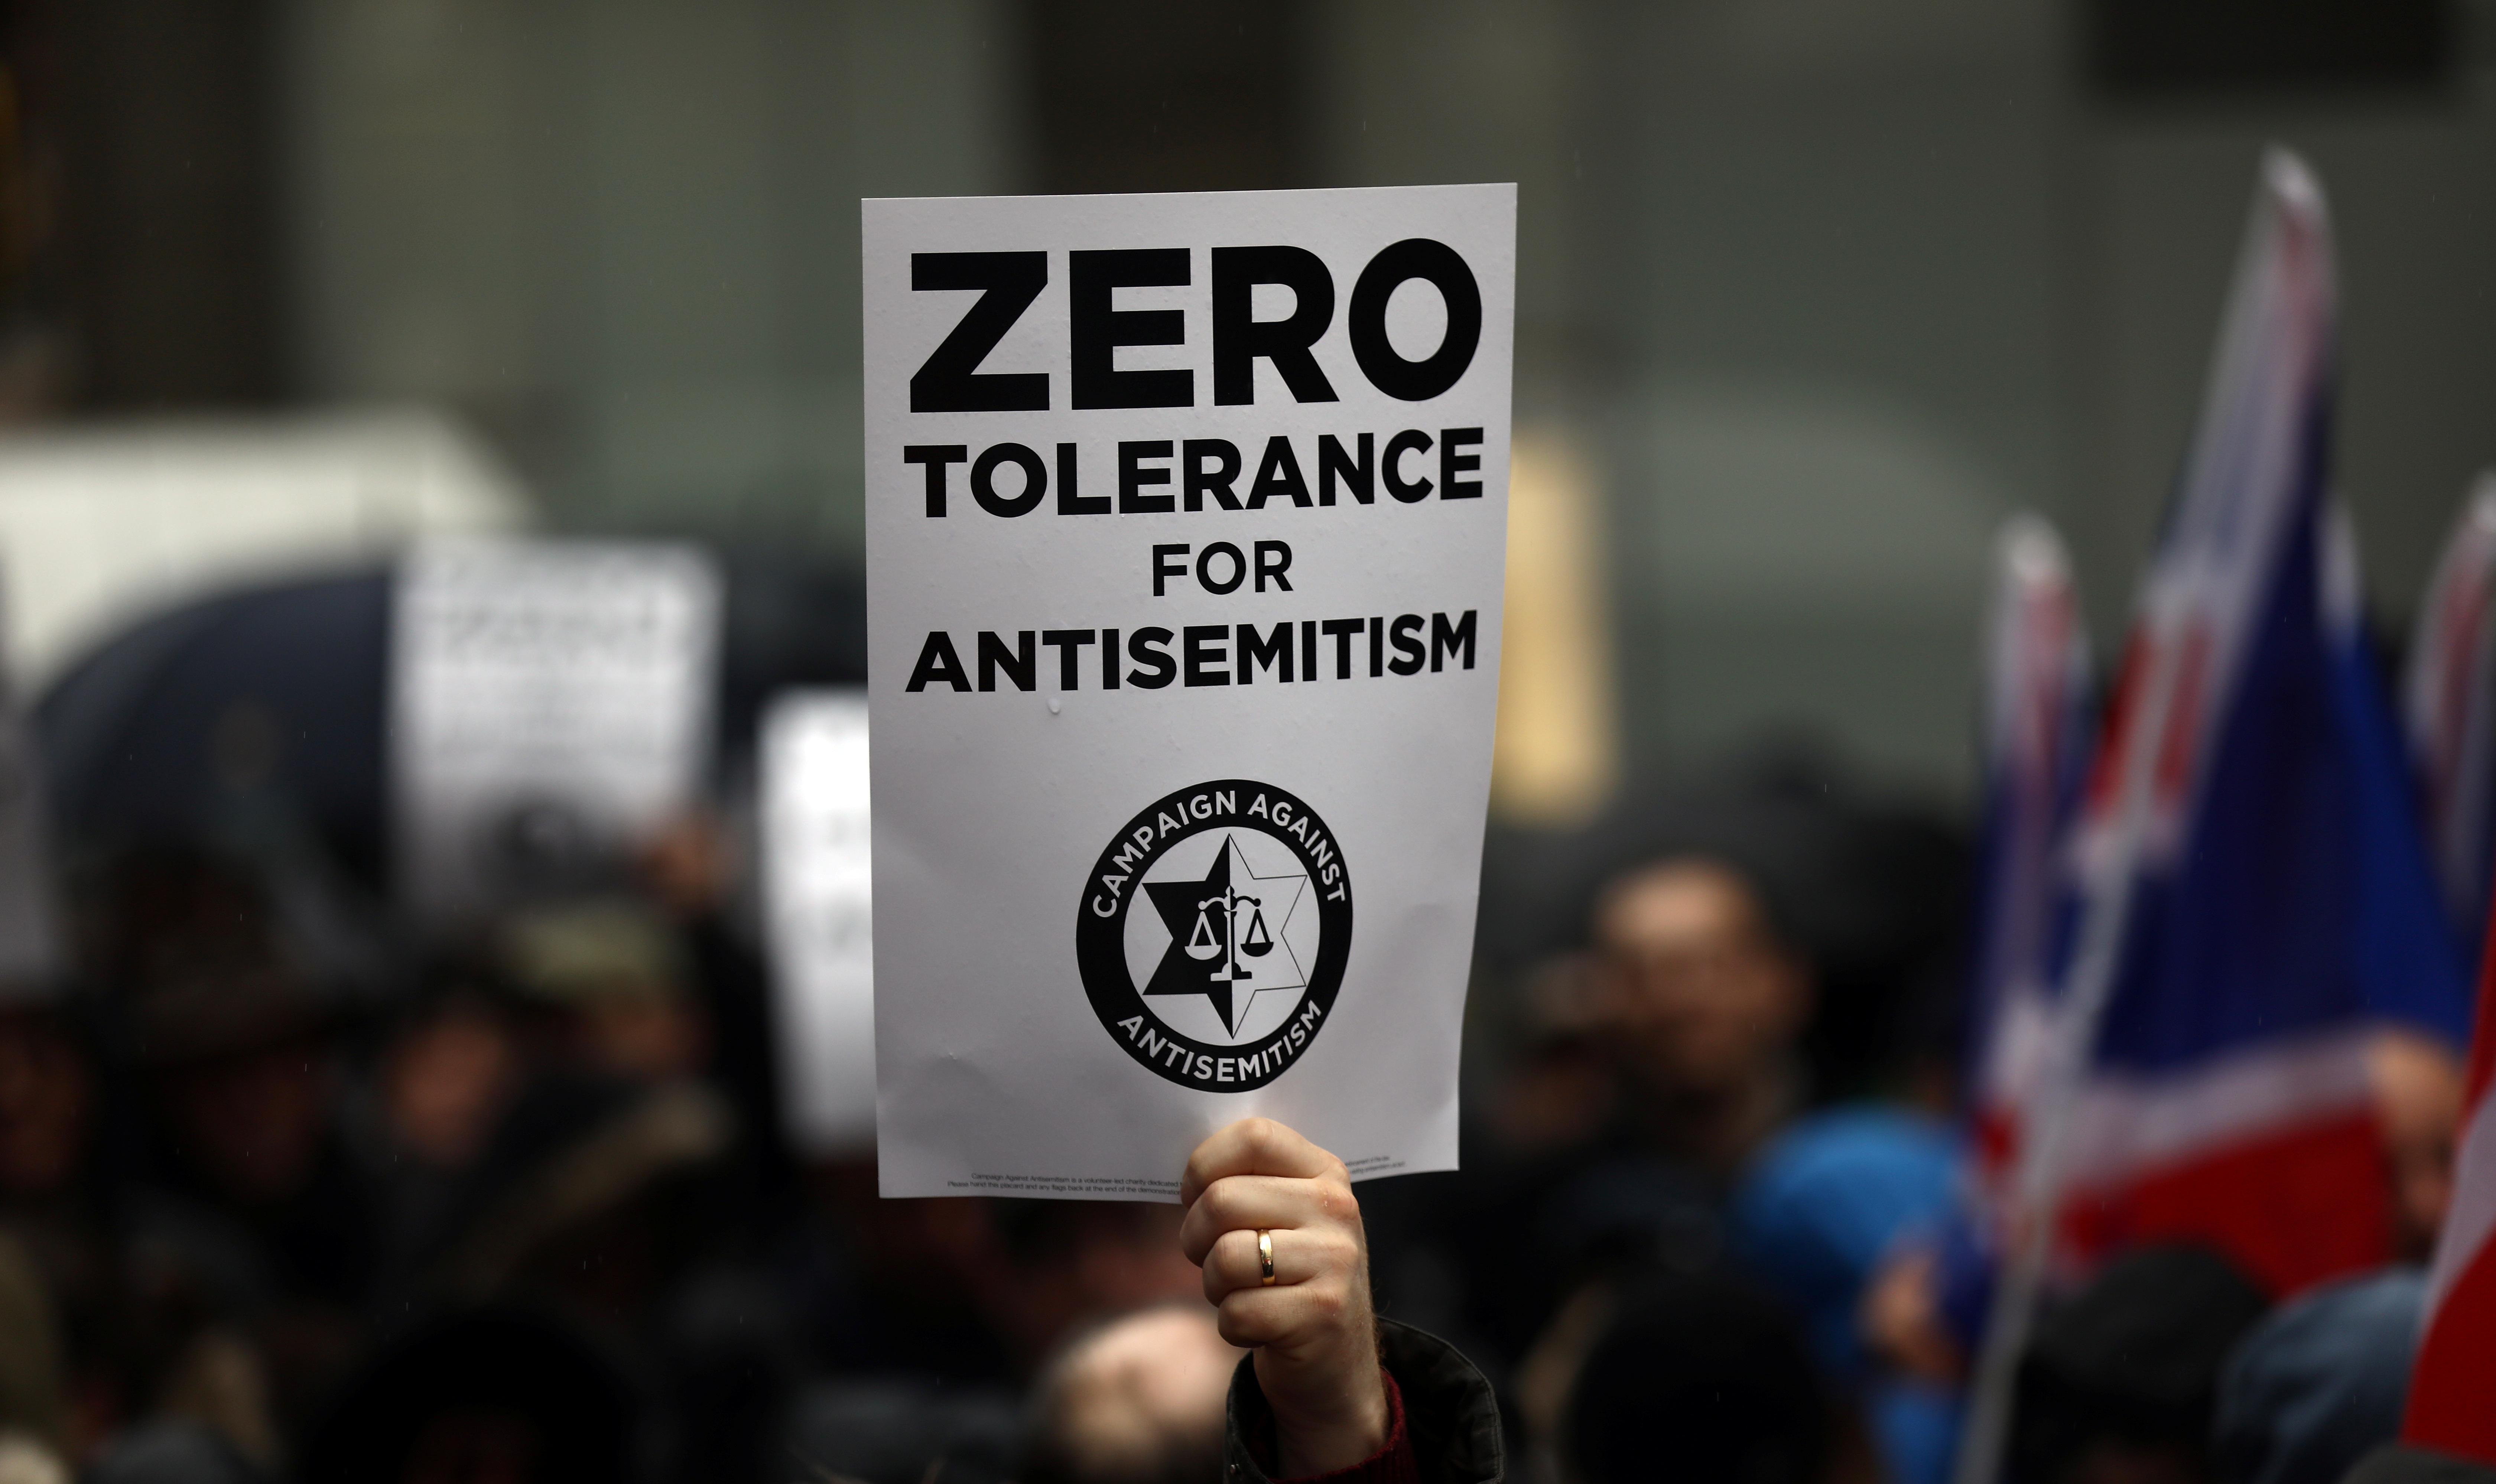 Demonstrators take part in an antisemitism protest outside the Labour Party headquarters in central London